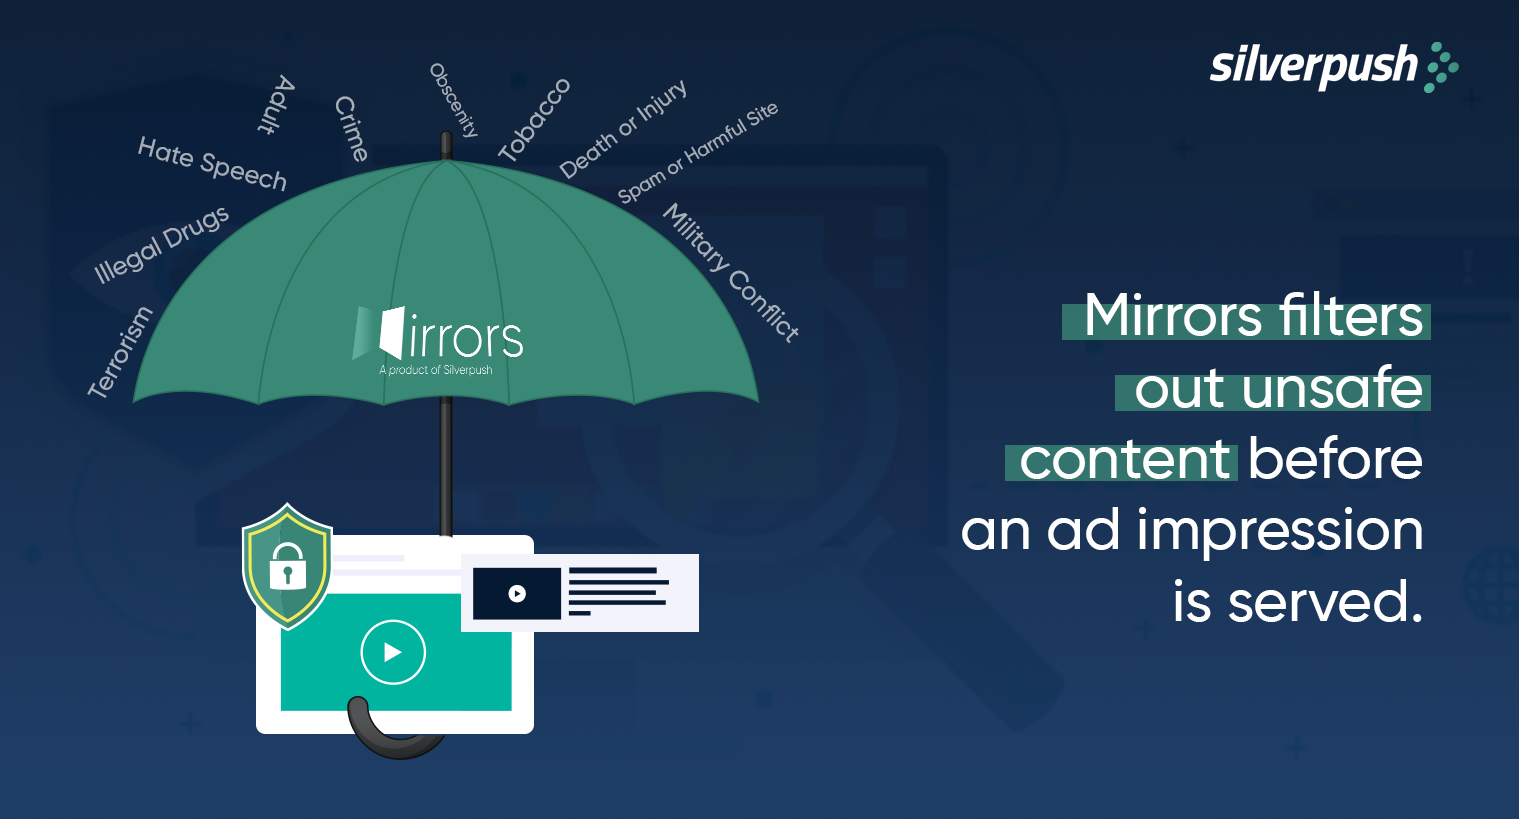 Mirrors filters out unsafe content before an ad impression is served